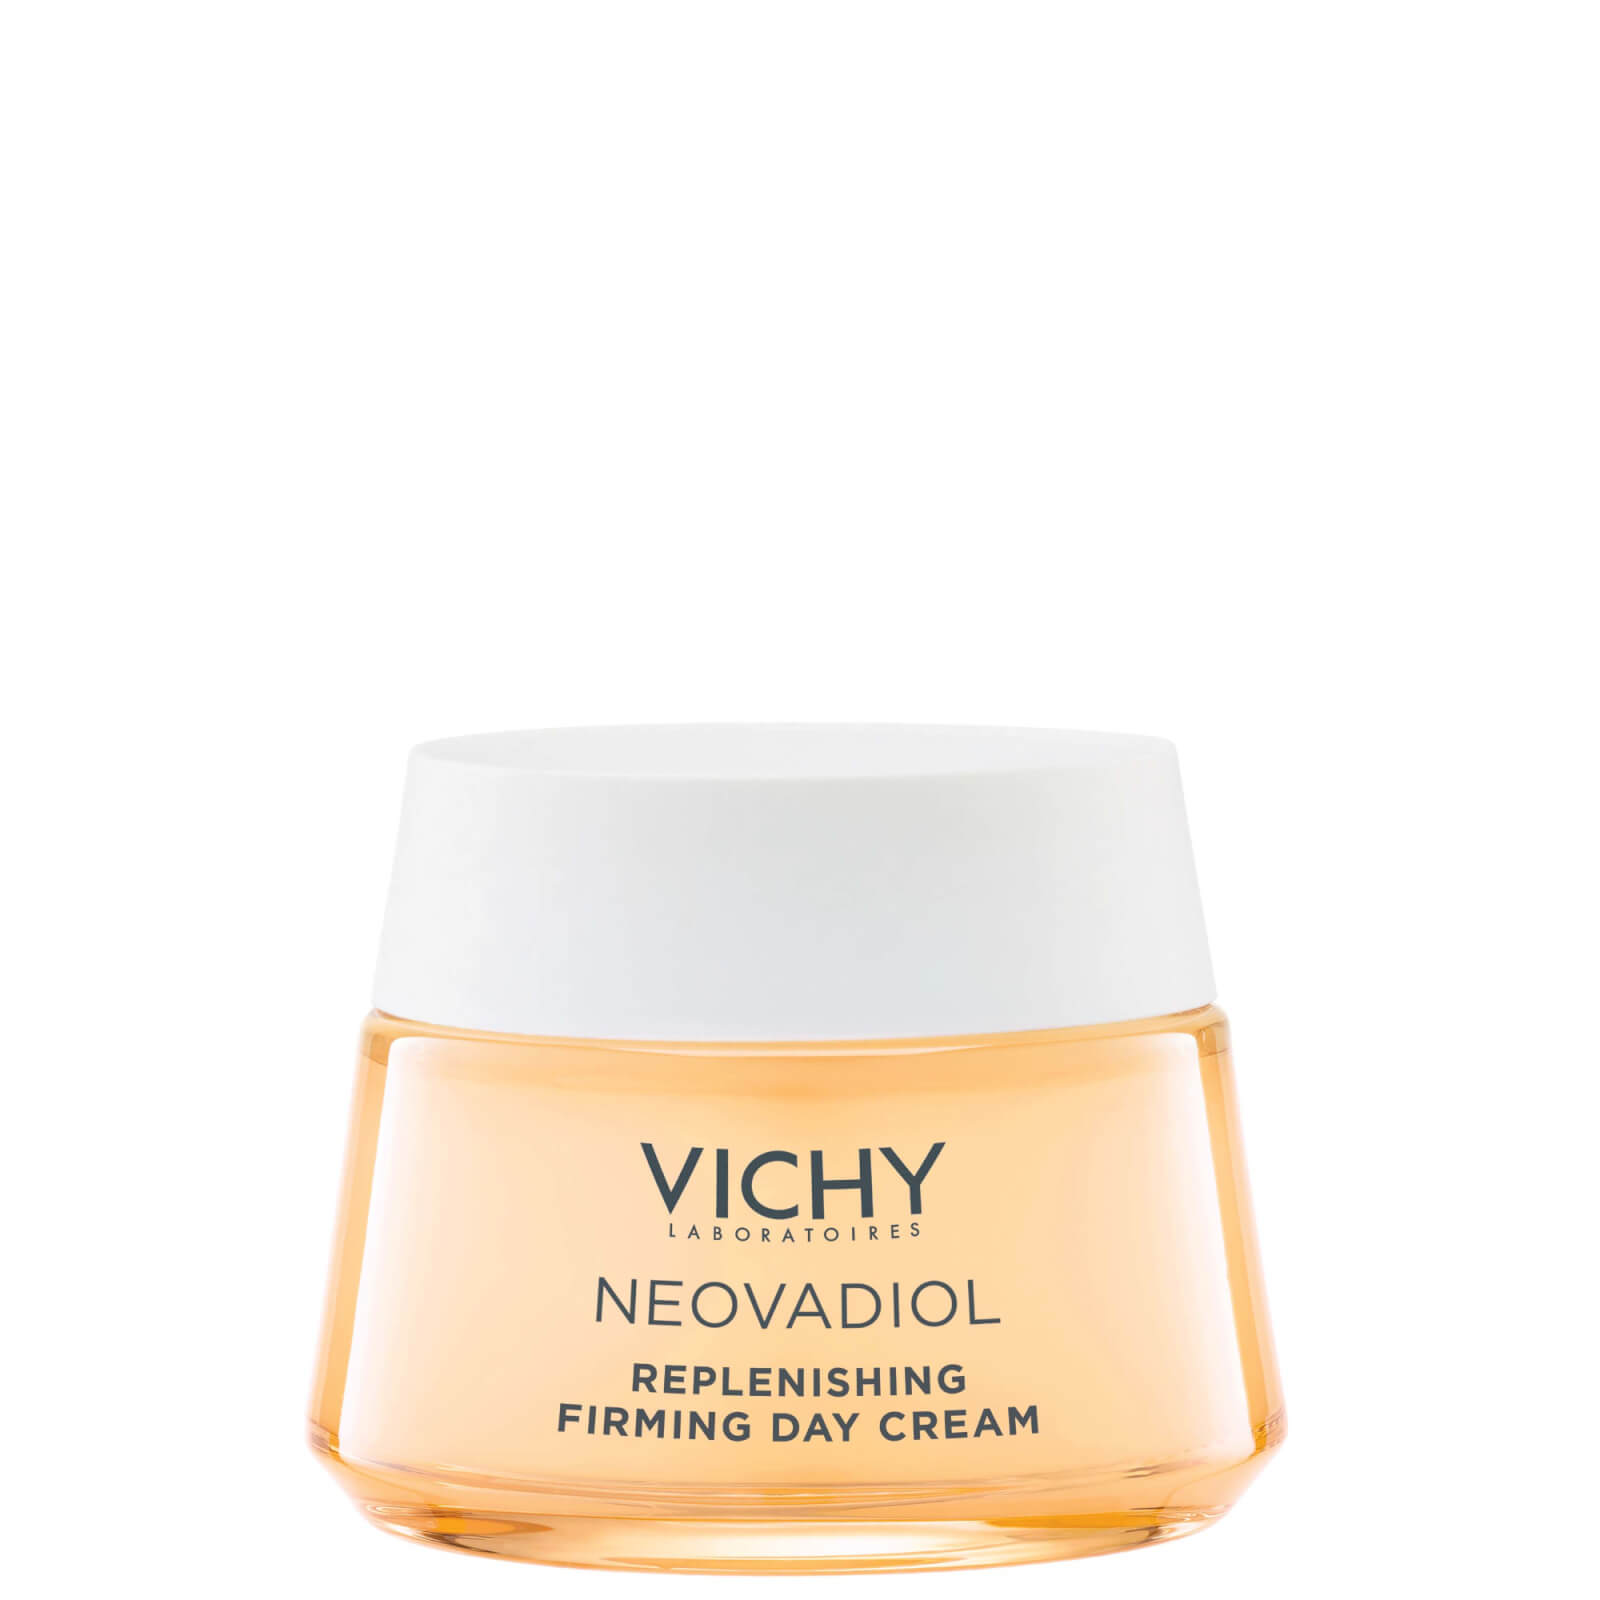 Vichy Neovodial Replenishing Day Cream For Post-menopause 47ml In White